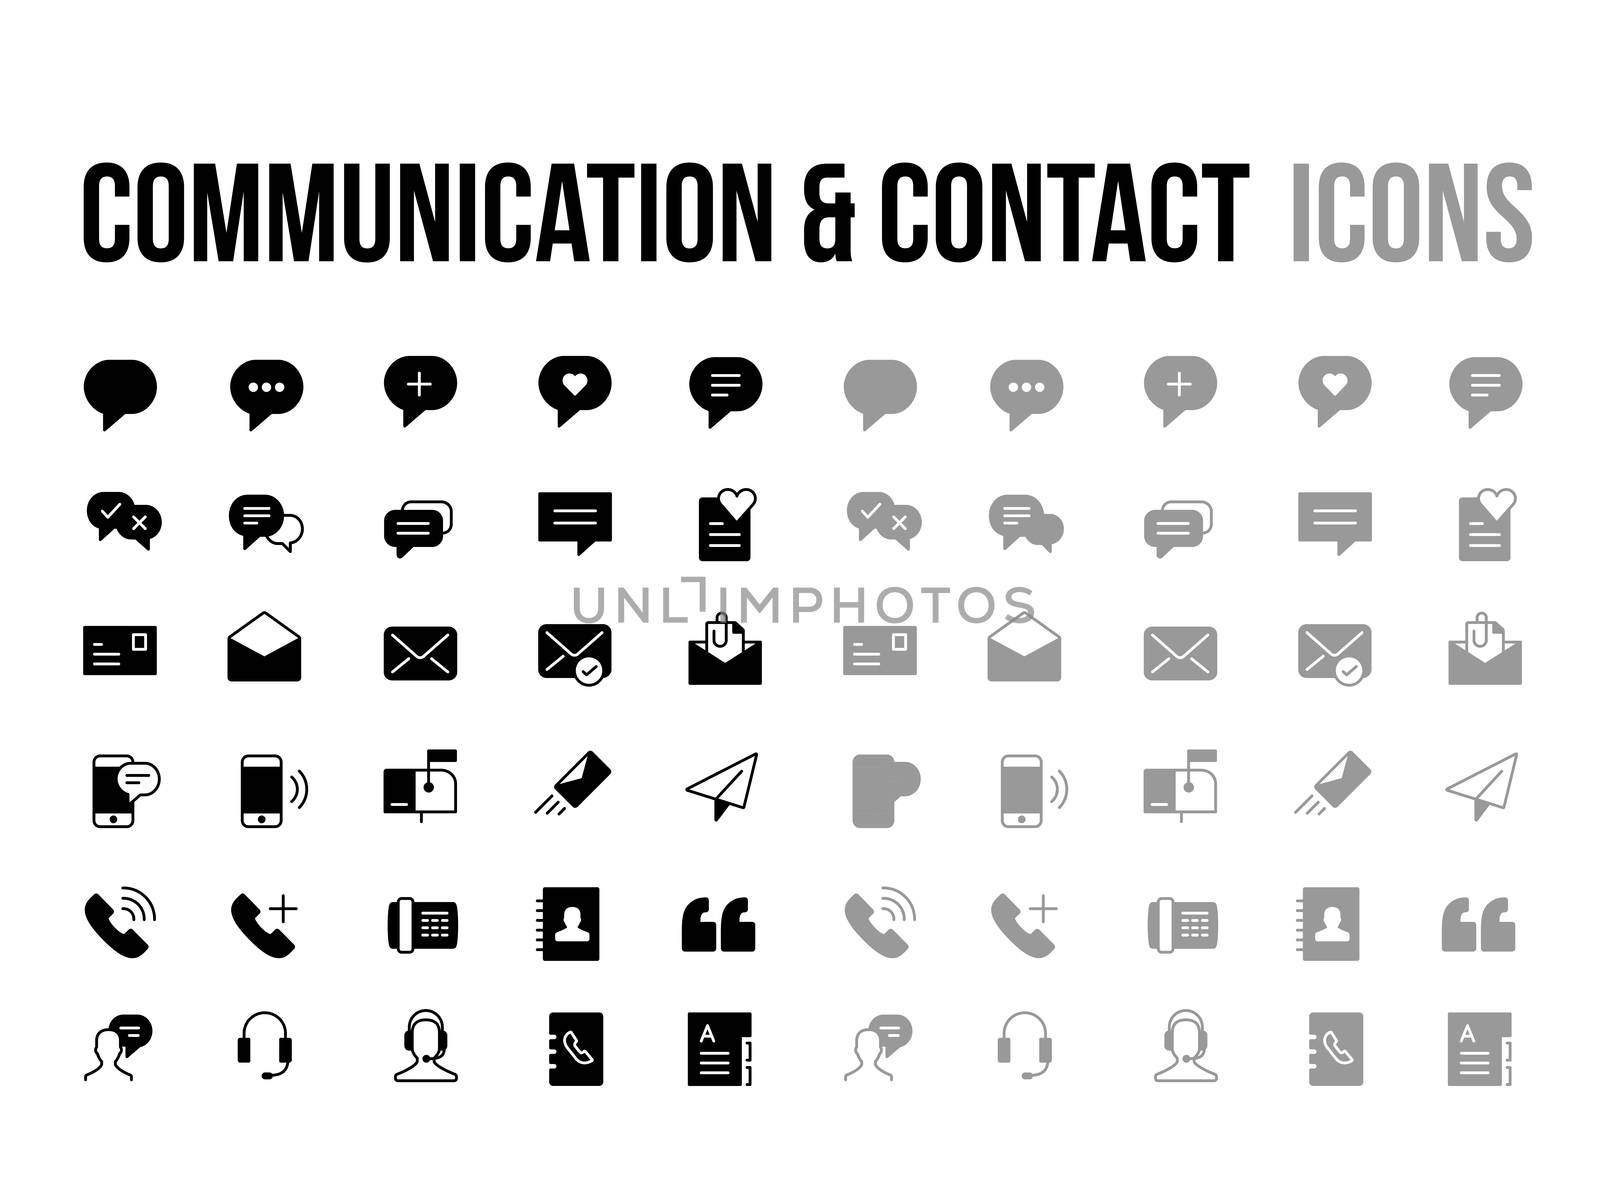 Customer support, contact, messaging, communication vector icon  by cougarsan